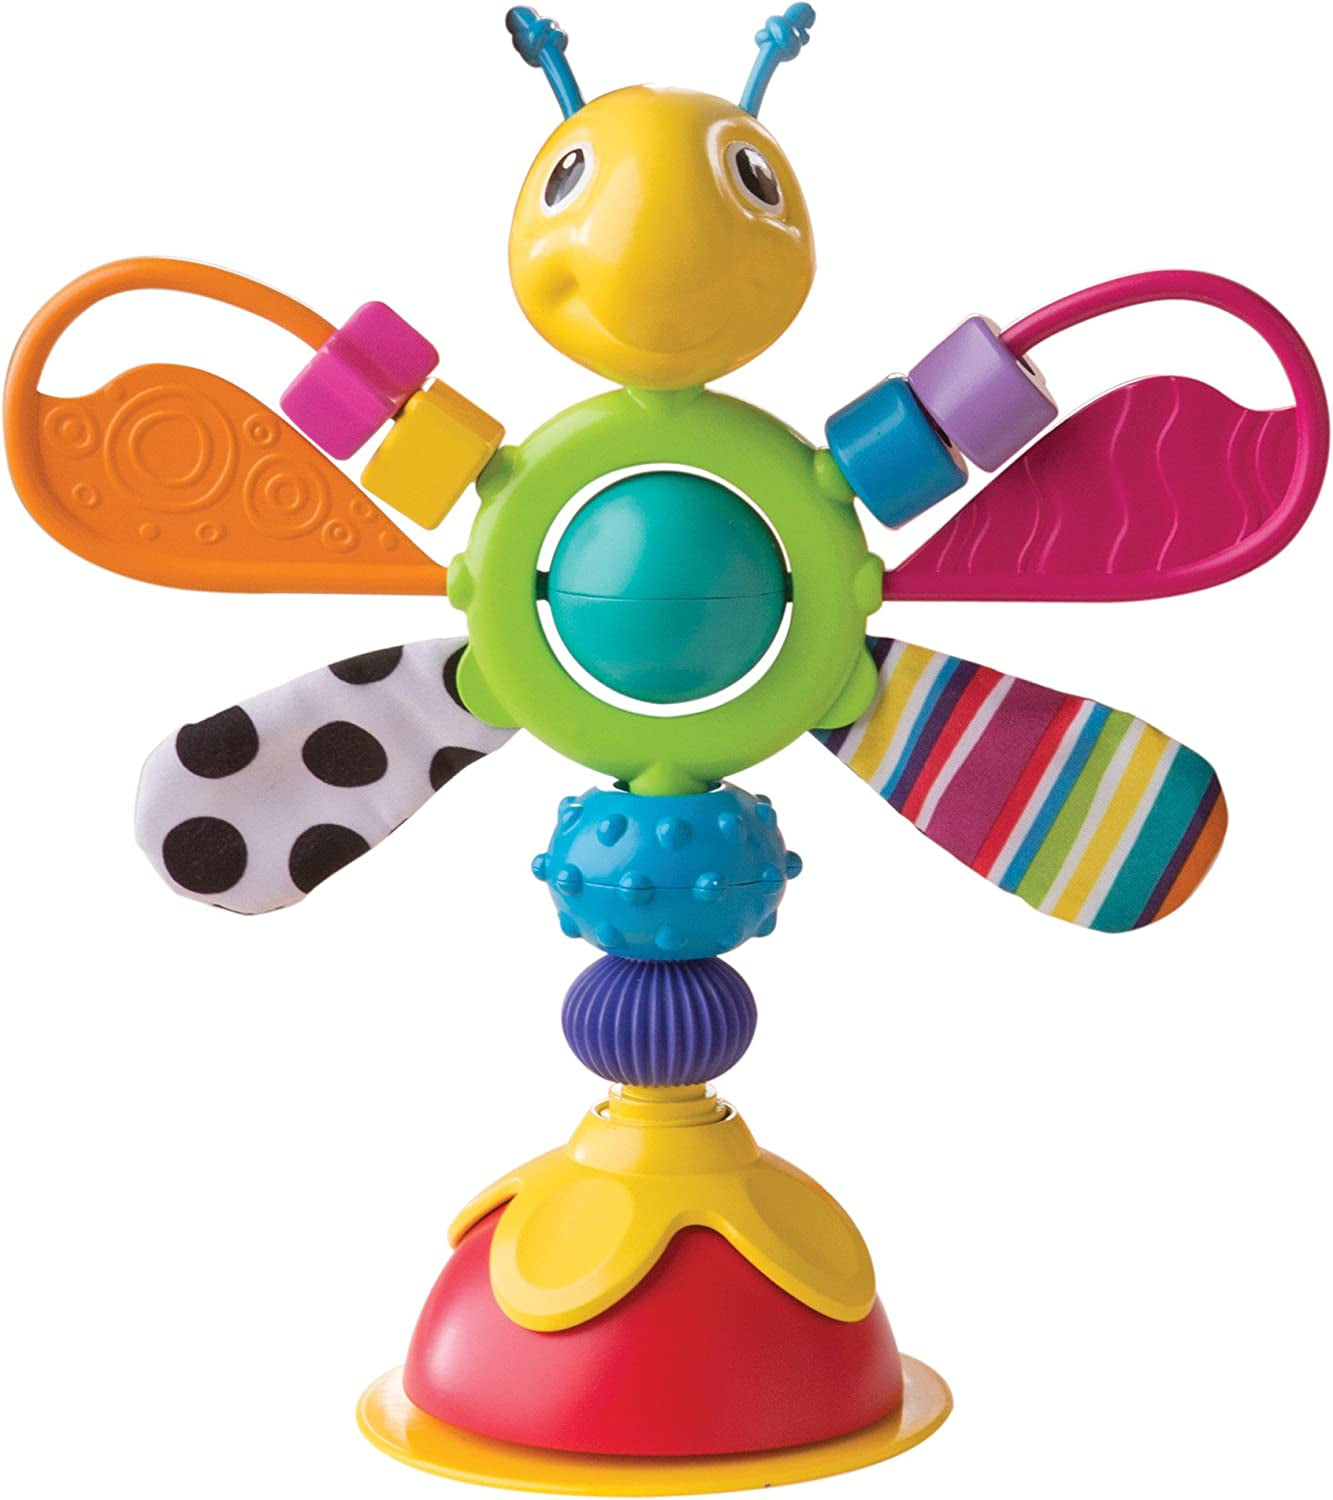 LAMAZE Freddie the Firefly Table Top Baby Toy, Babies Toy for Sensory Play, Suitable for Boys & Girls from 6 Months+